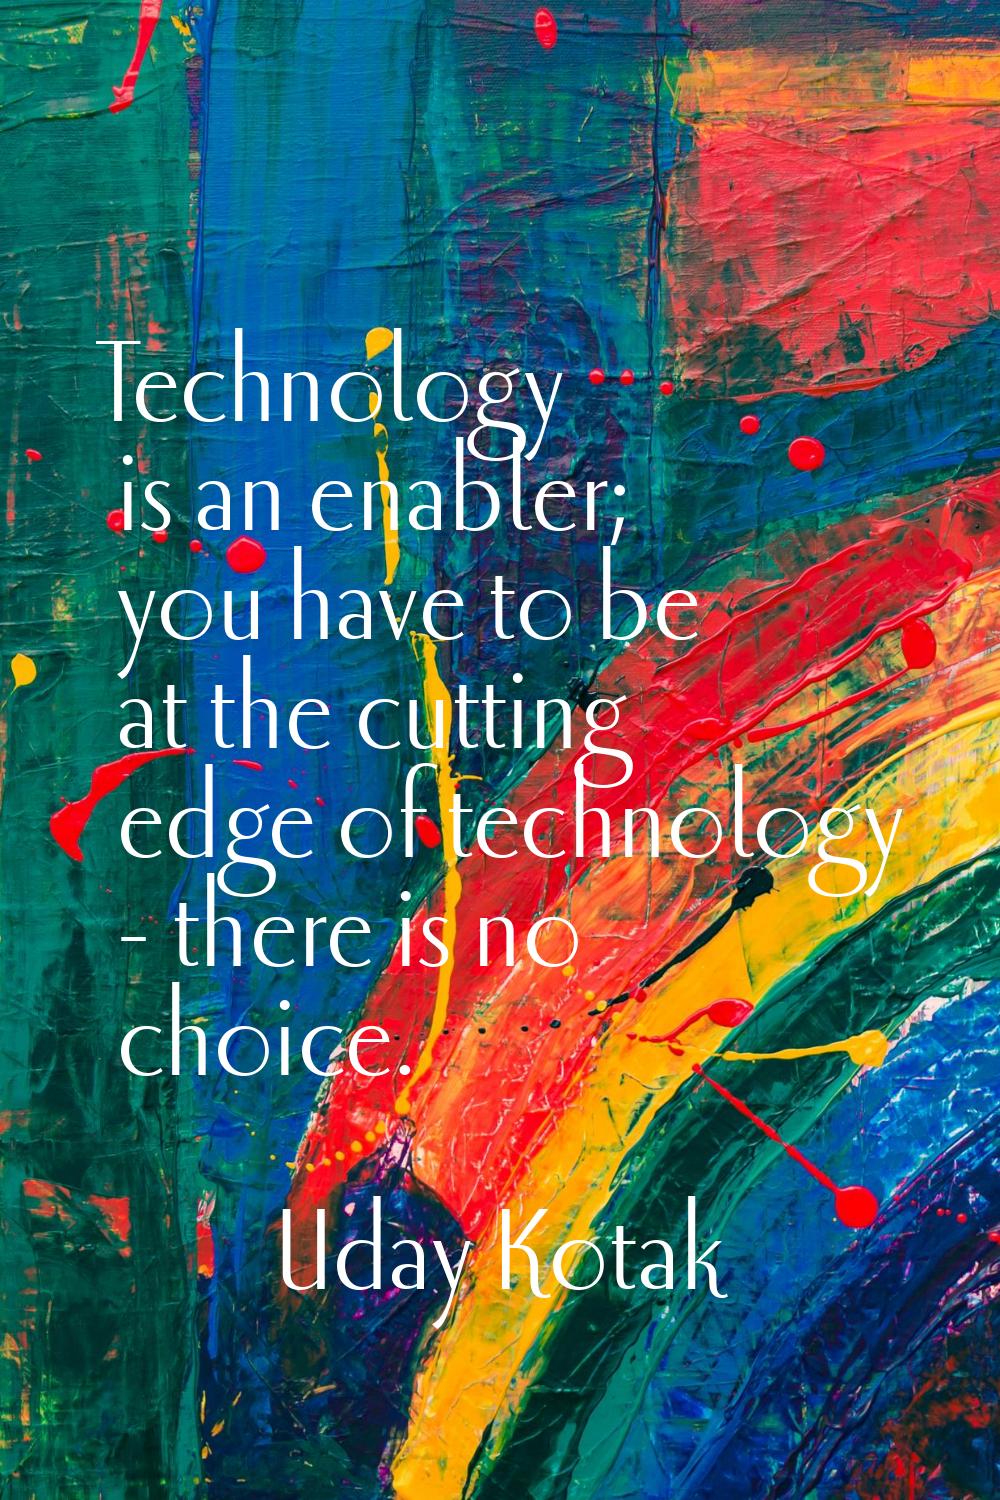 Technology is an enabler; you have to be at the cutting edge of technology - there is no choice.